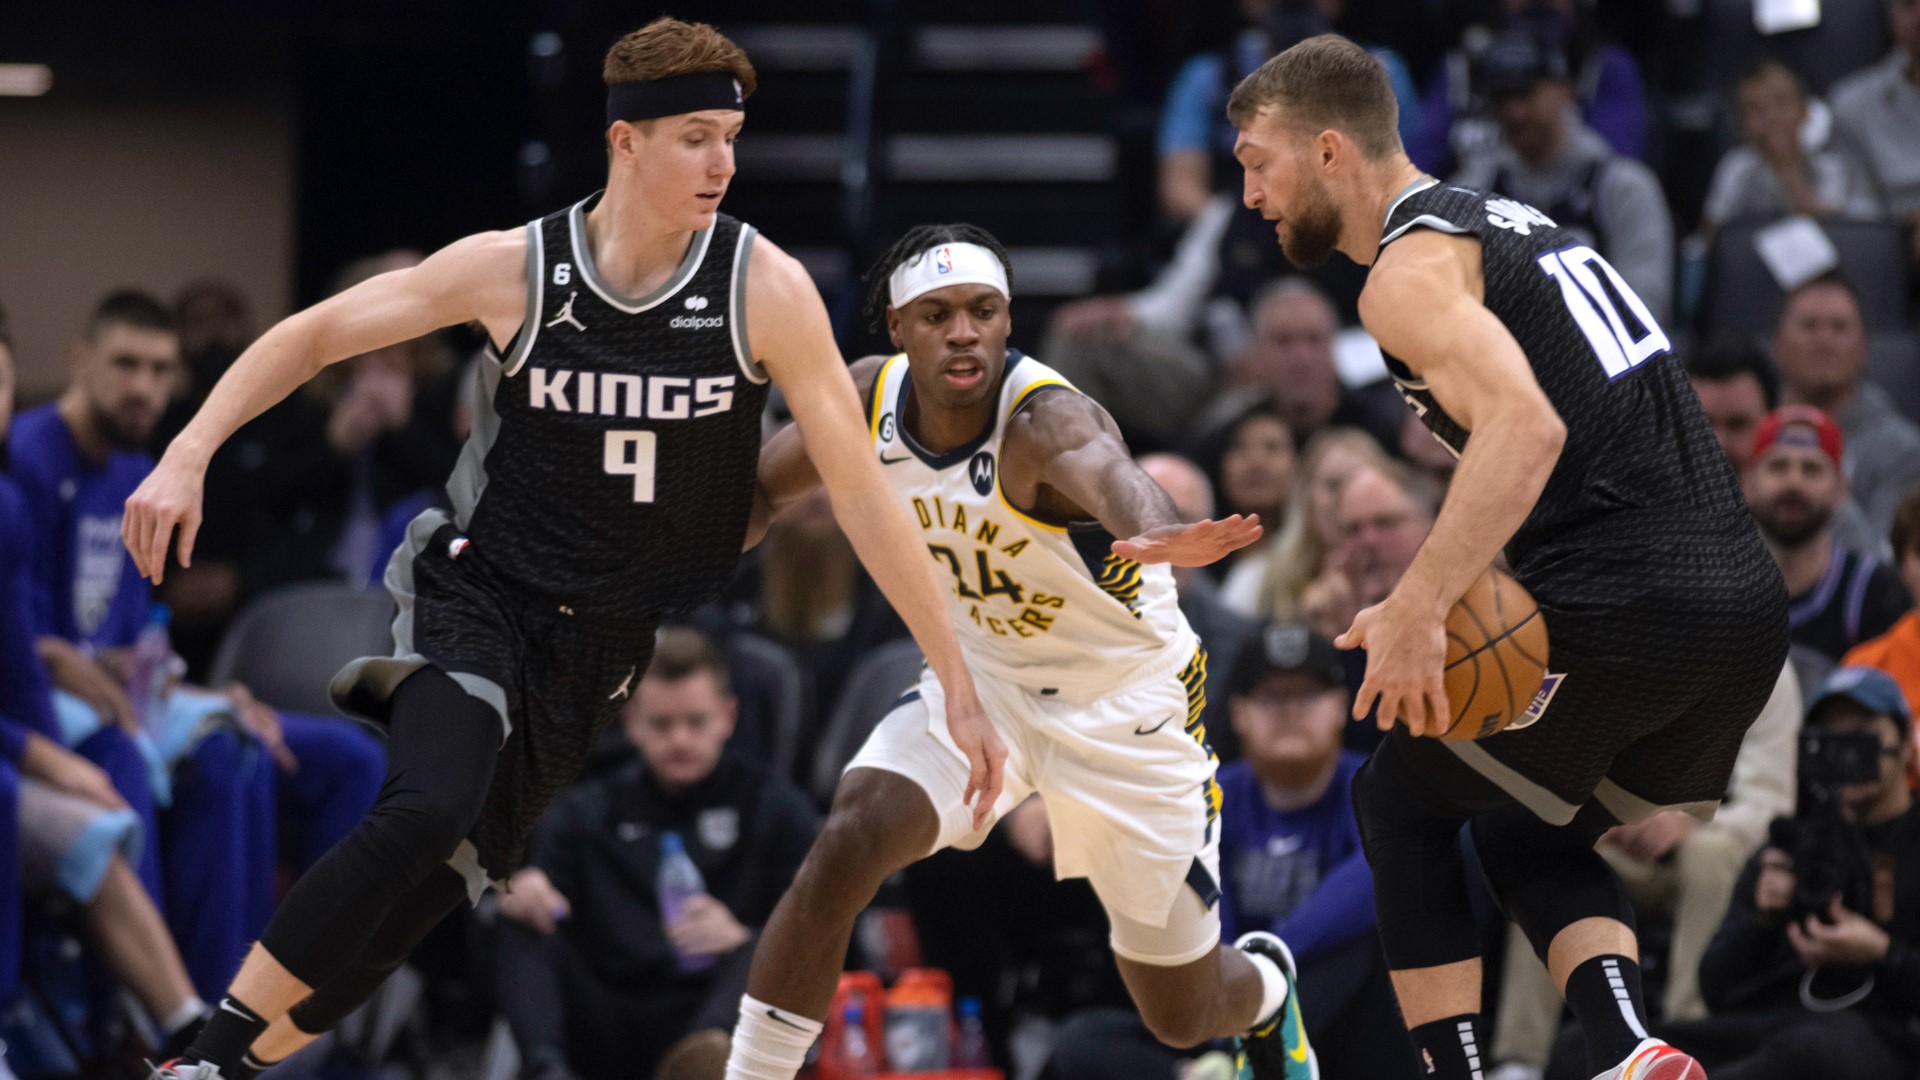 The Sacramento Kings snapped a three-game skid after besting the Pacers. It also came as Buddy Hield and Tyrese Haliburton made their return to the Golden 1 Center.